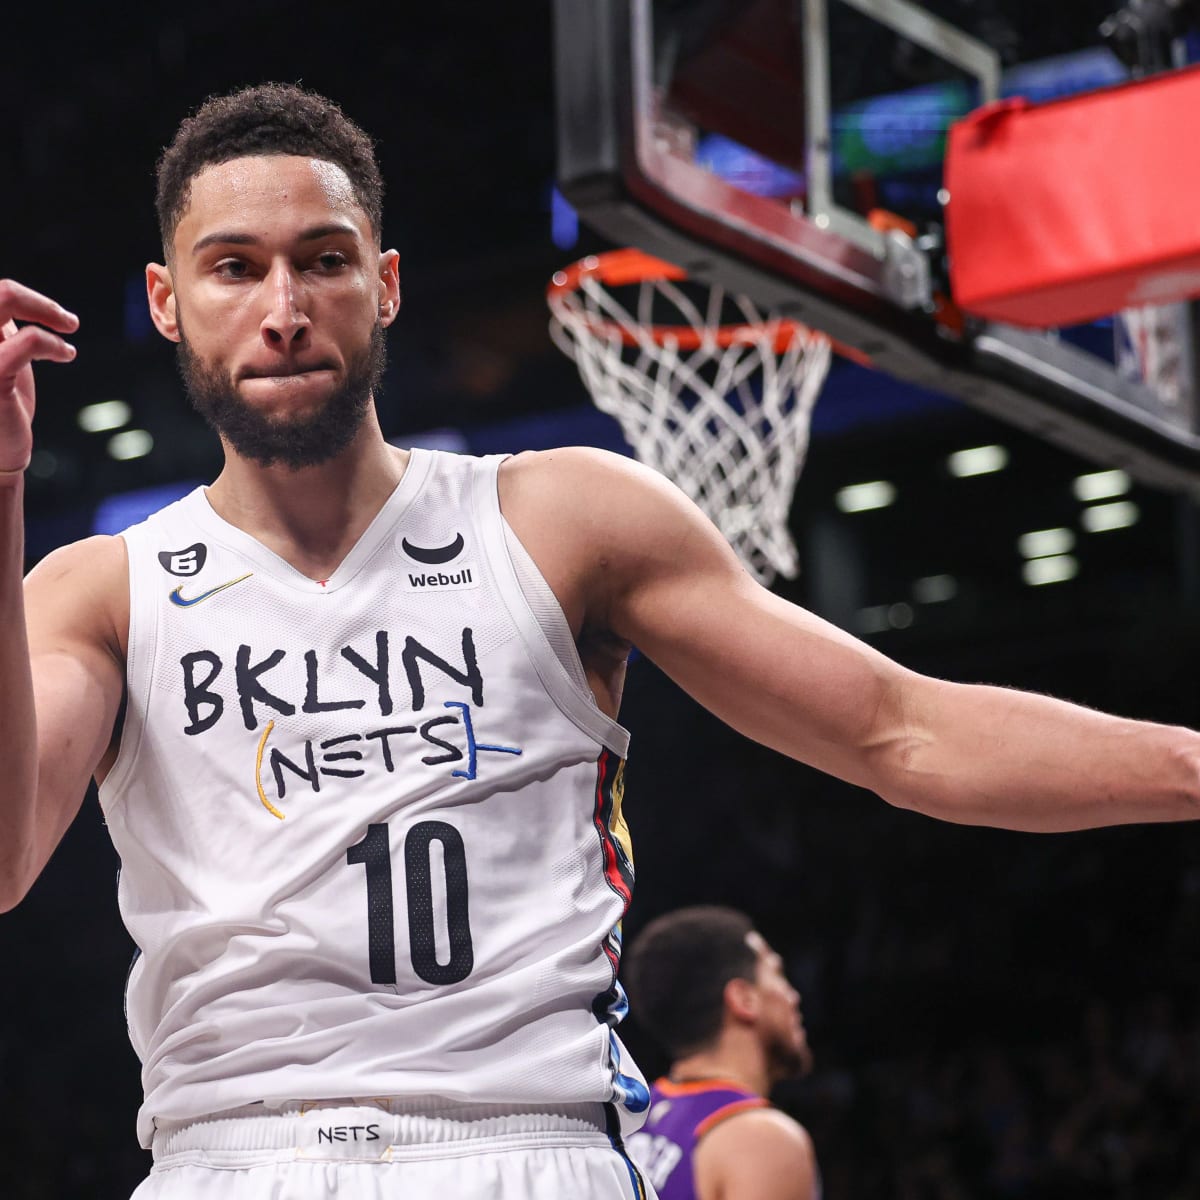 Ben Simmons takes court for Nets in first look at new Big 3